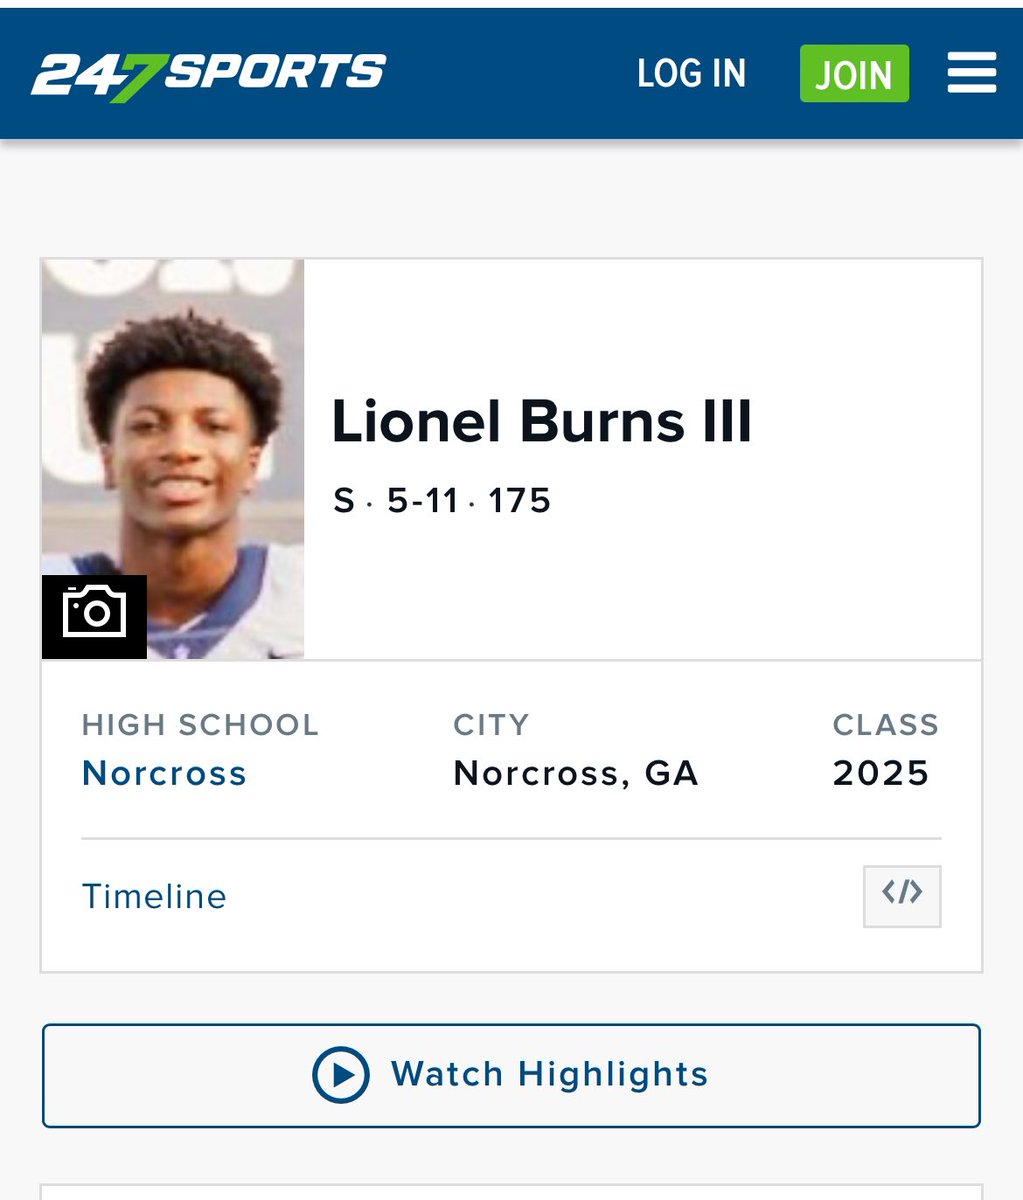 Thanks @247Sports for the account. @gchapatl @Andrew_Ivins